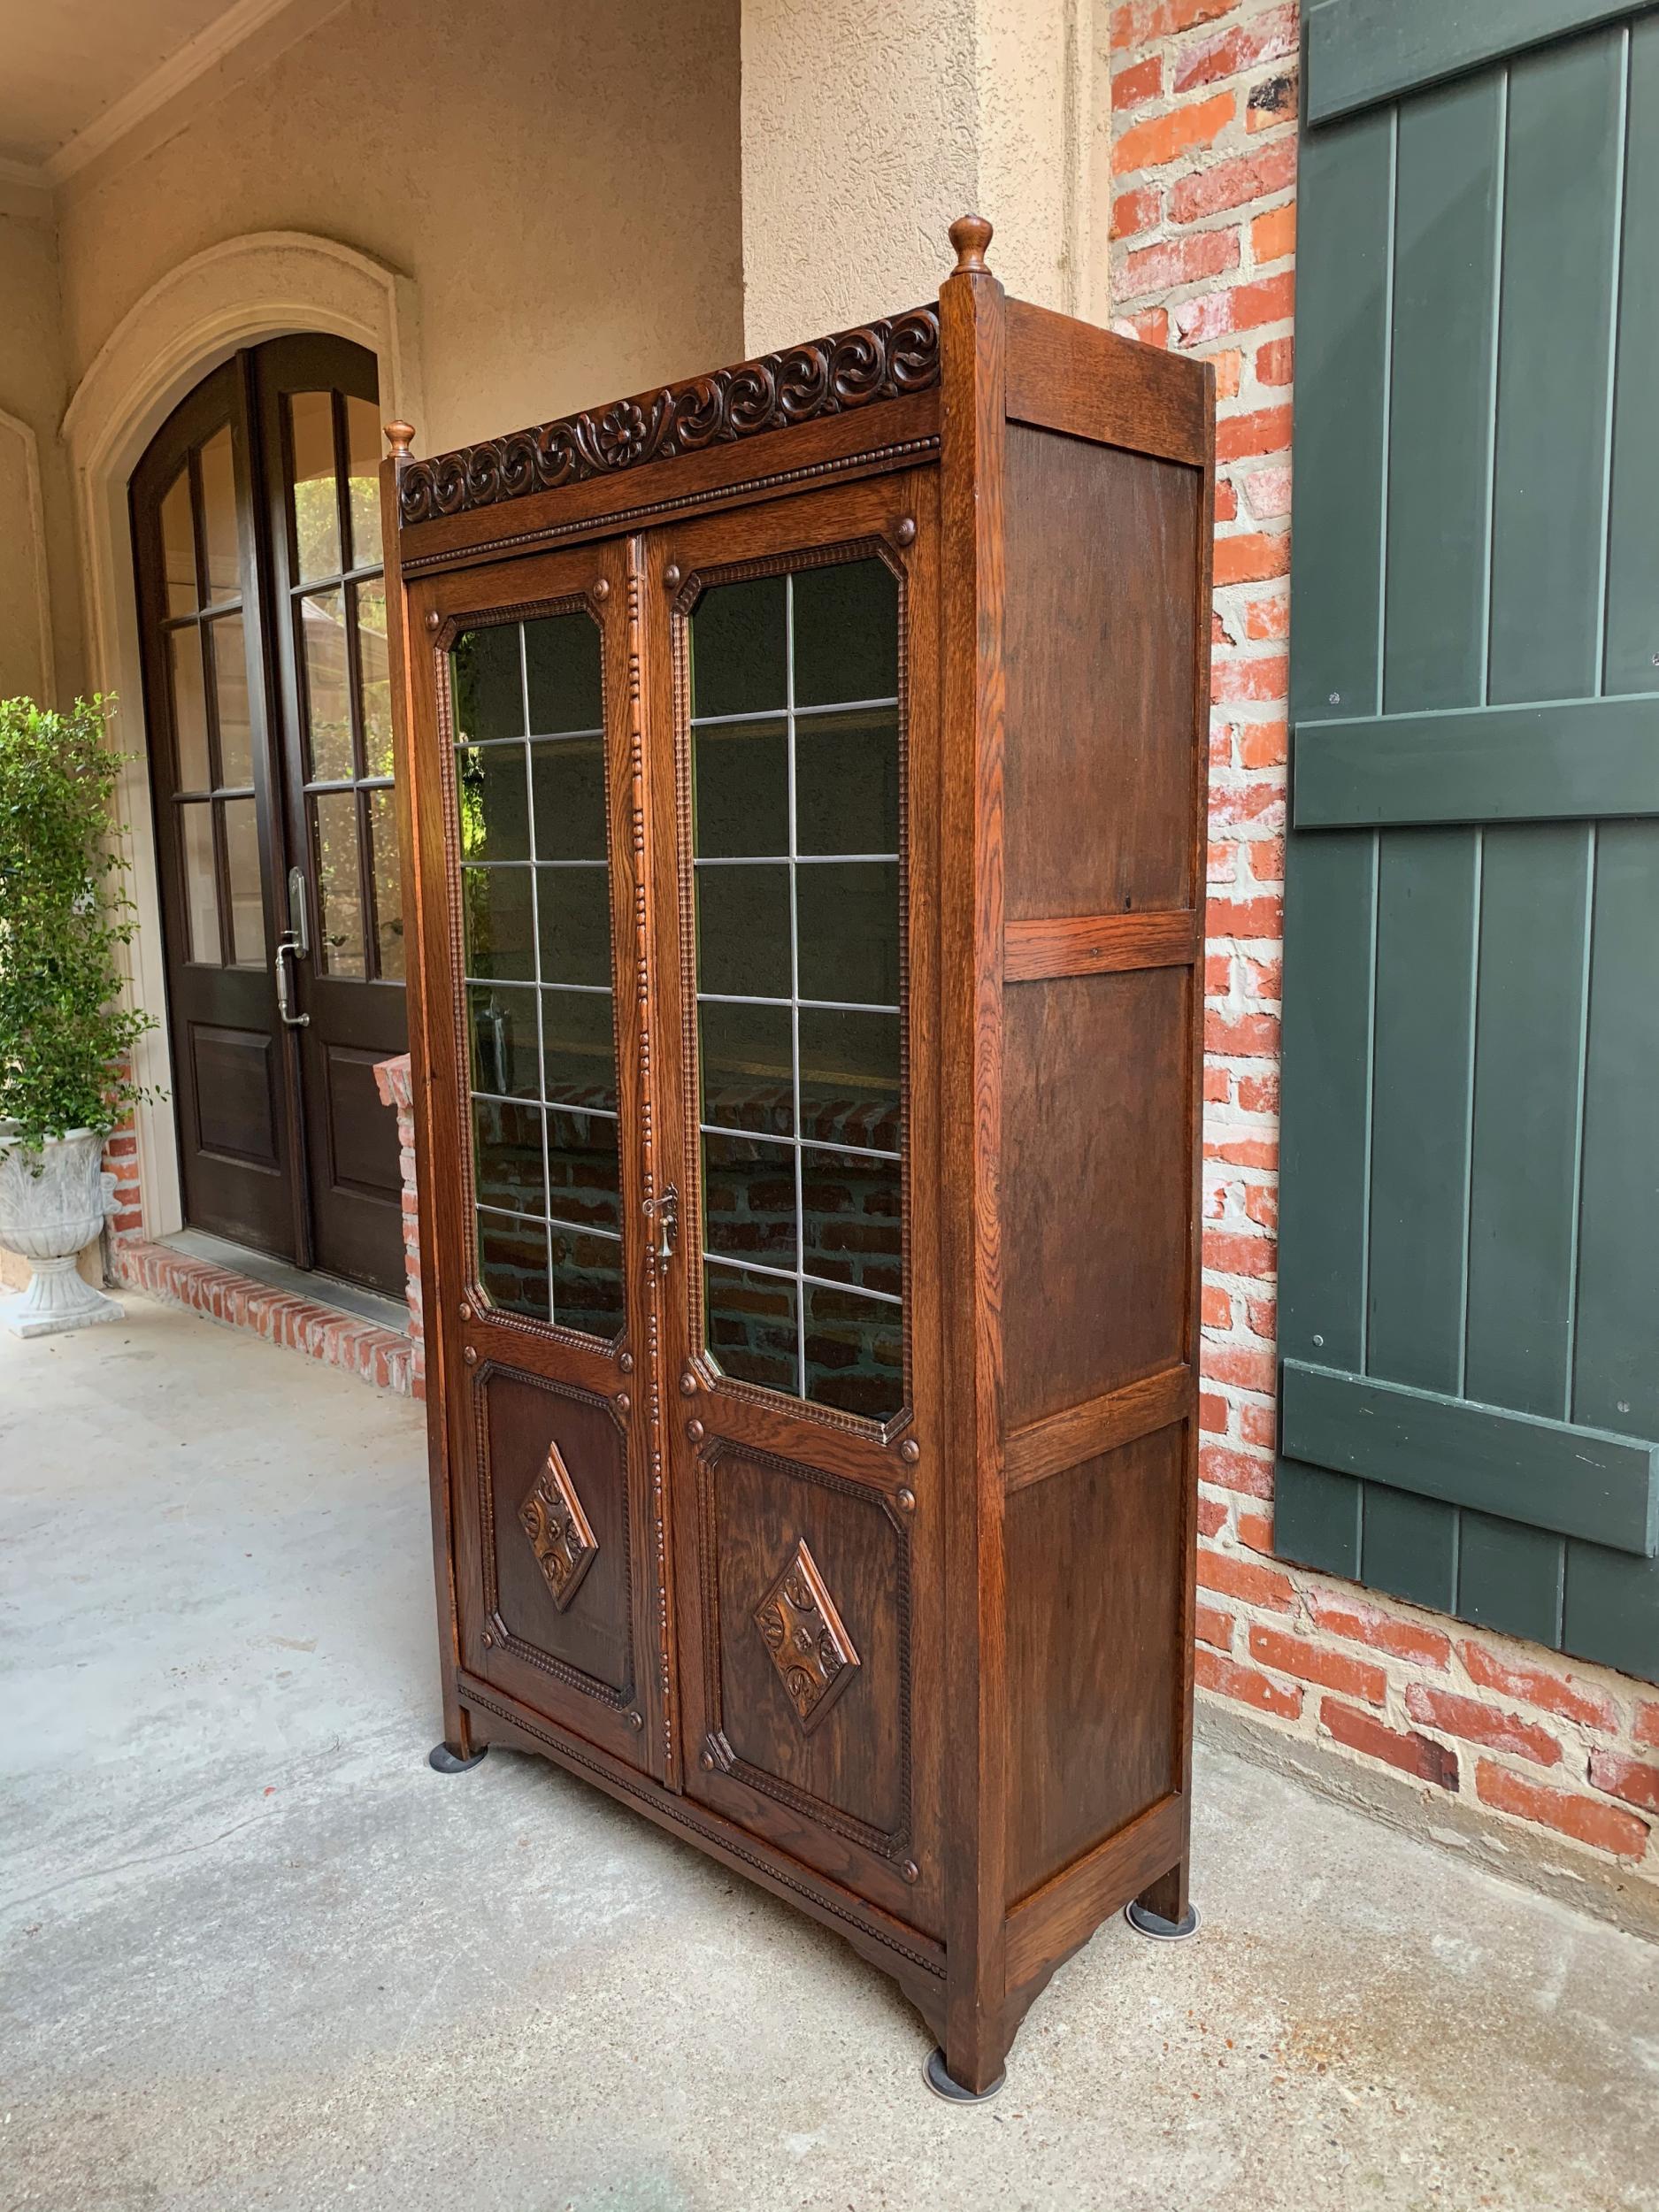 ~6 ft. tall antique English oak bookcase, with traditional English style and a slender profile to fit in so many areas of your home!~
~Full length carved crown flanked by oak finials above the large double doors~
~Jacobean style, loaded with